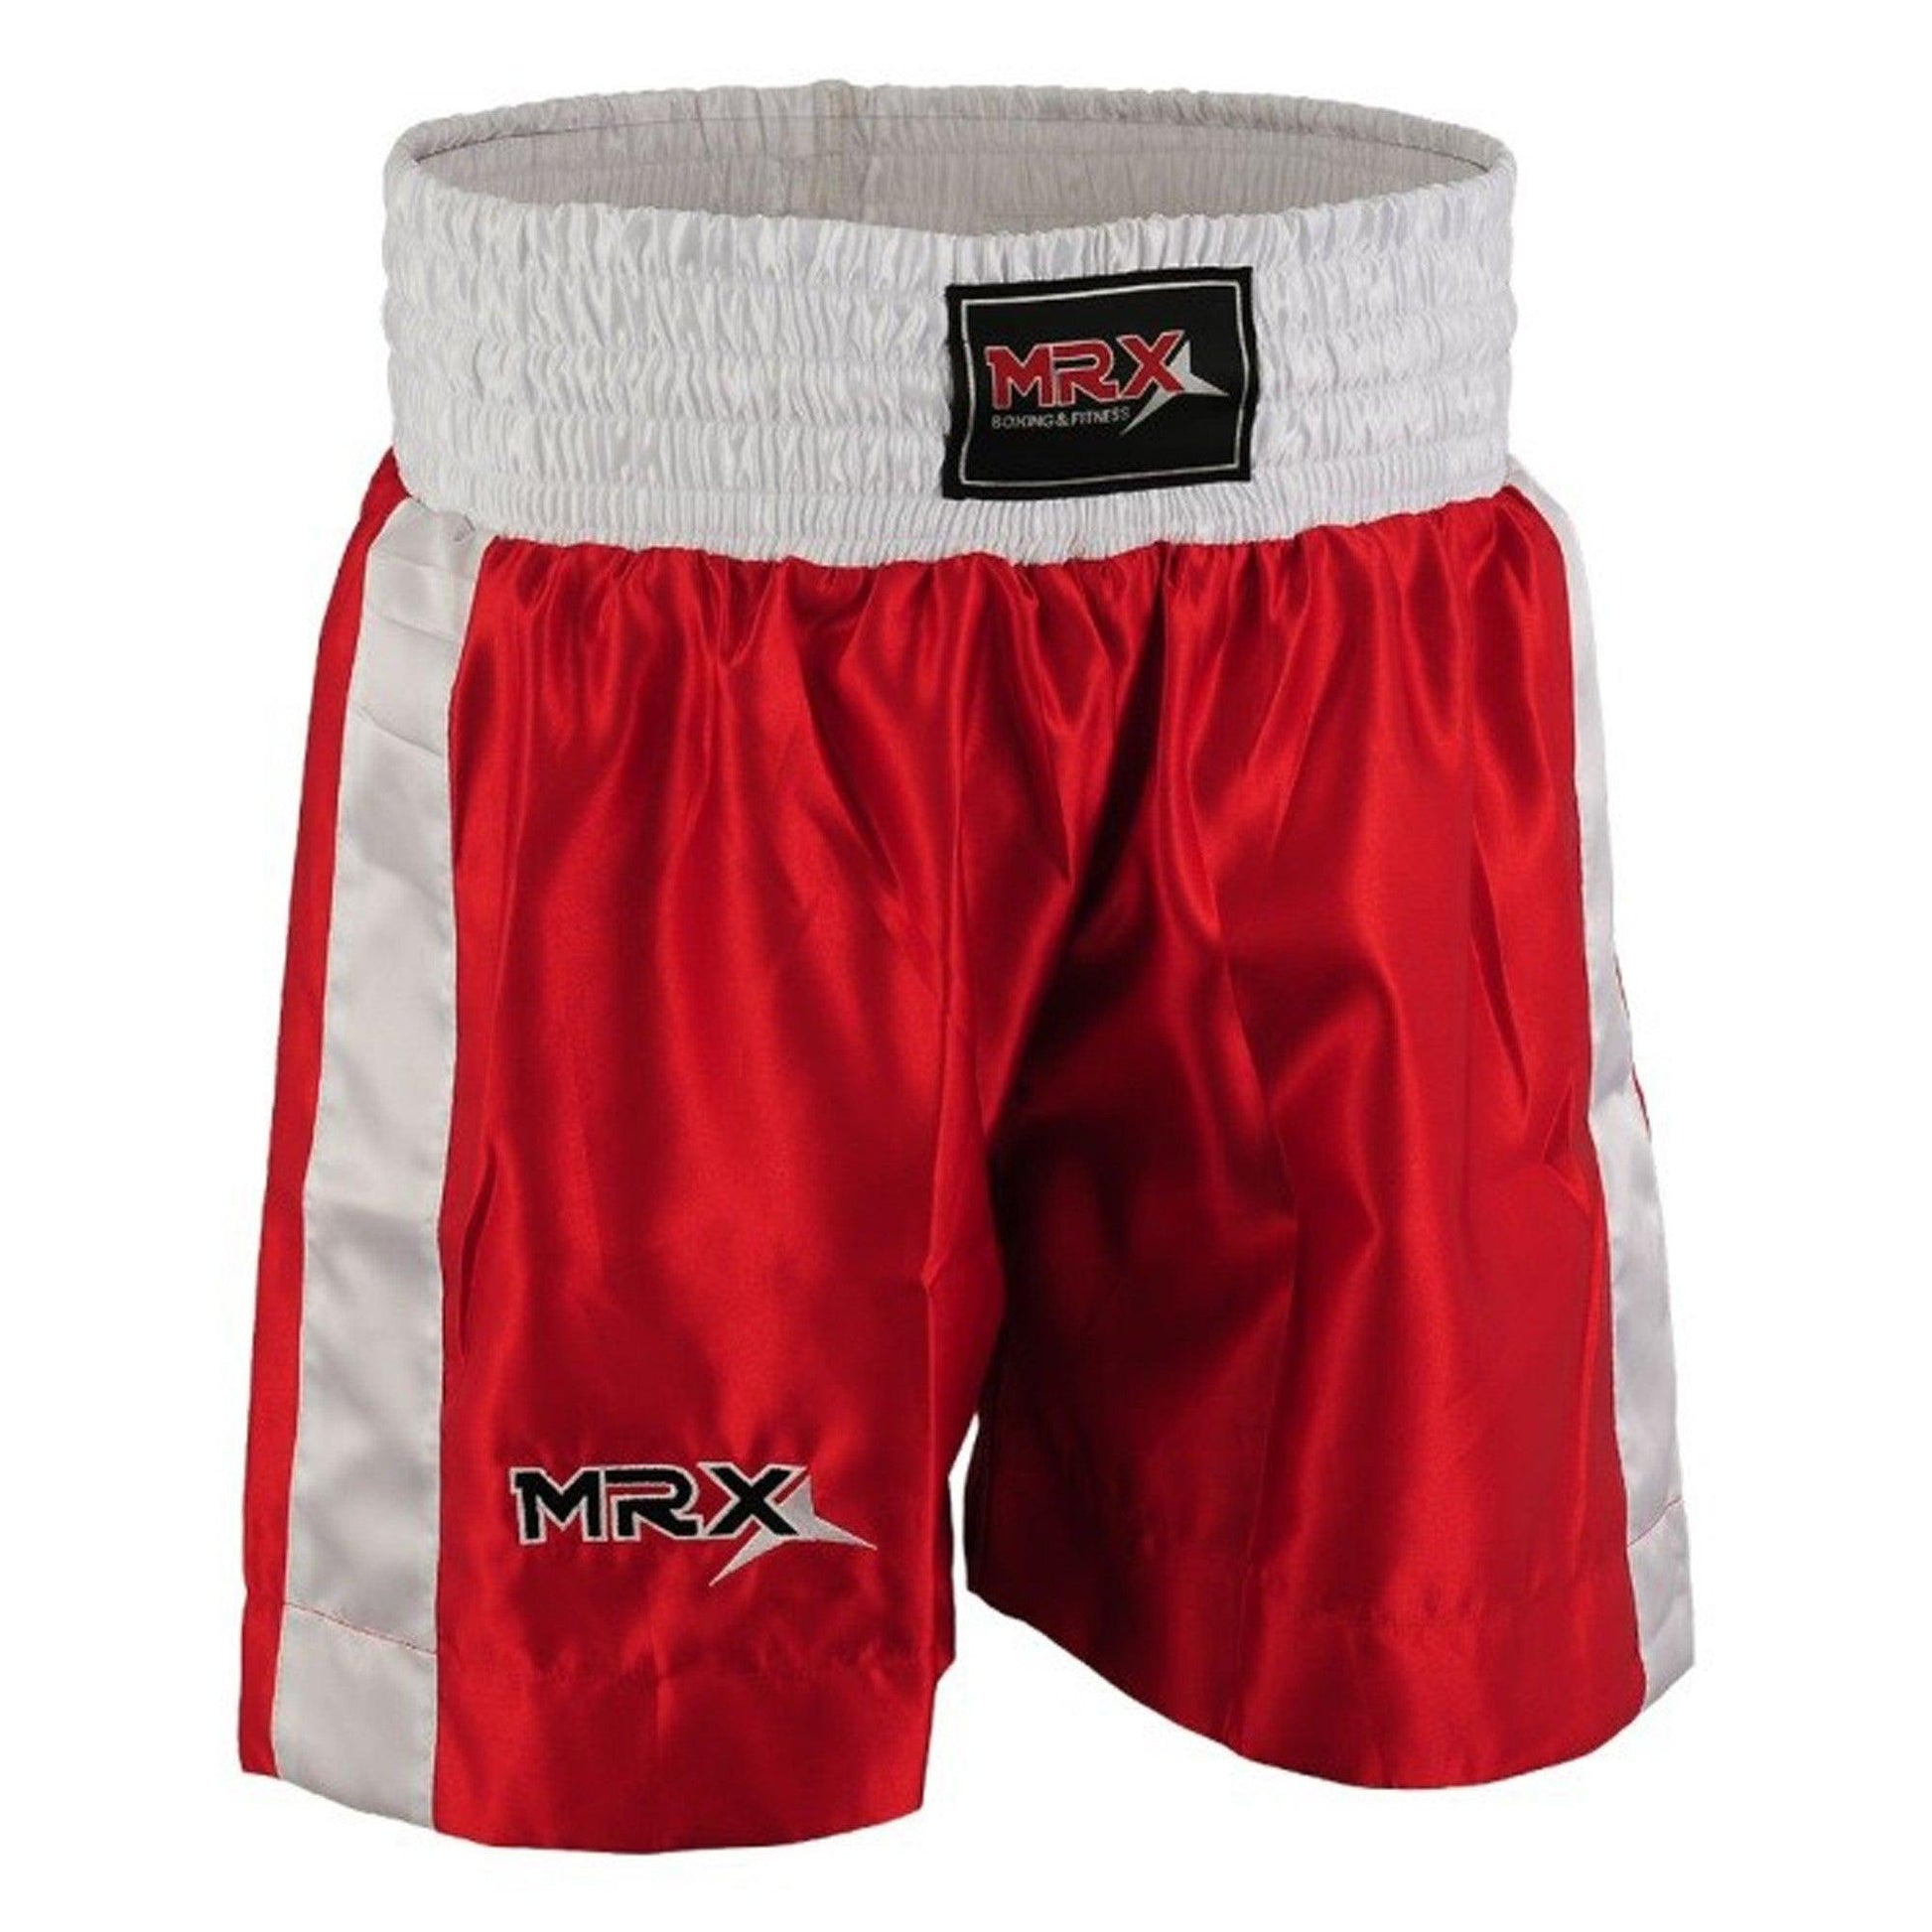 MRX Mens Boxing Shorts Fighting Shorts Red-white-1301 - MRX Products 